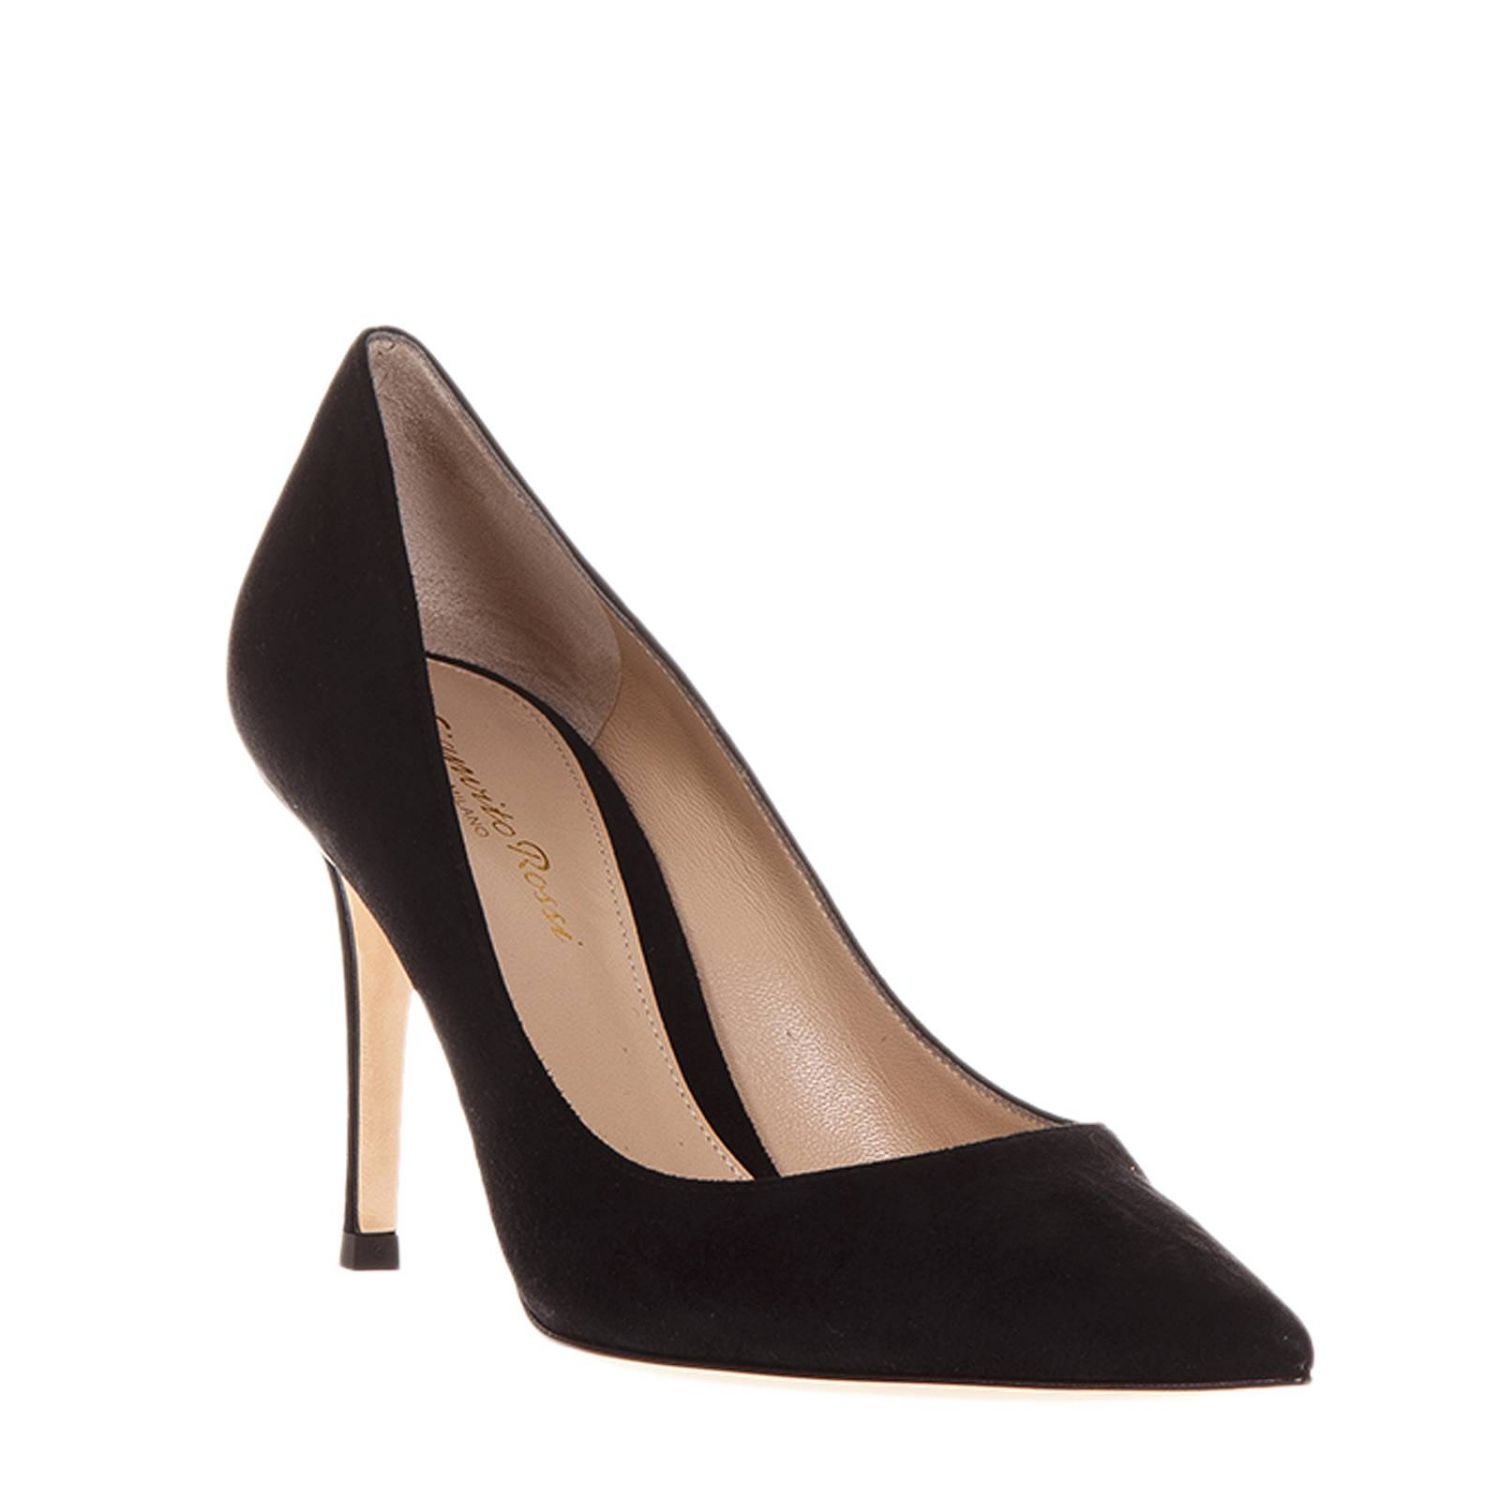 Gianvito Rossi Outlet: Shoes women | Court Shoes Gianvito Rossi Women ...